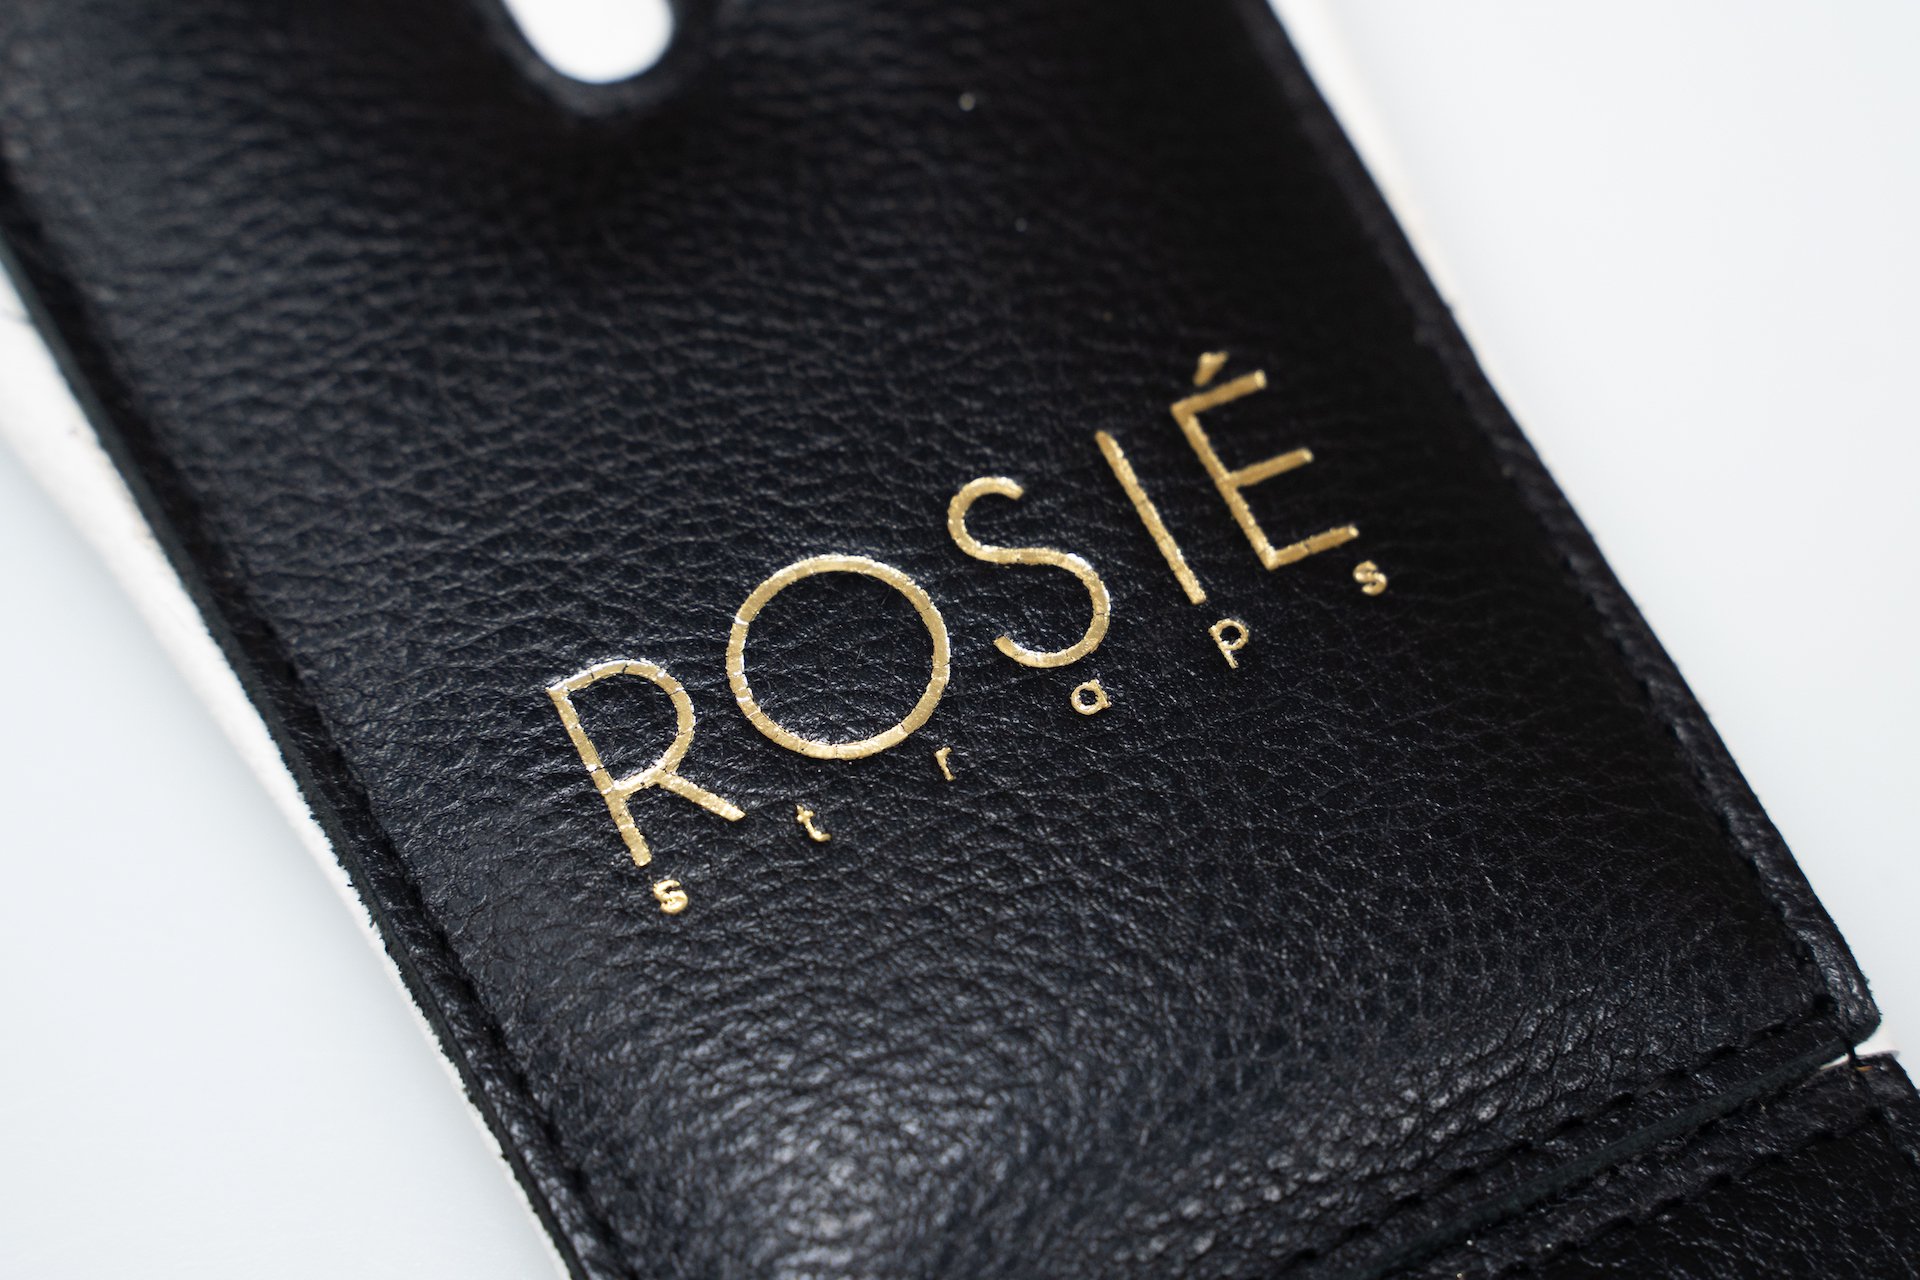 newROSIÉ / ROSIE straps Limited Collection B&W Black with White